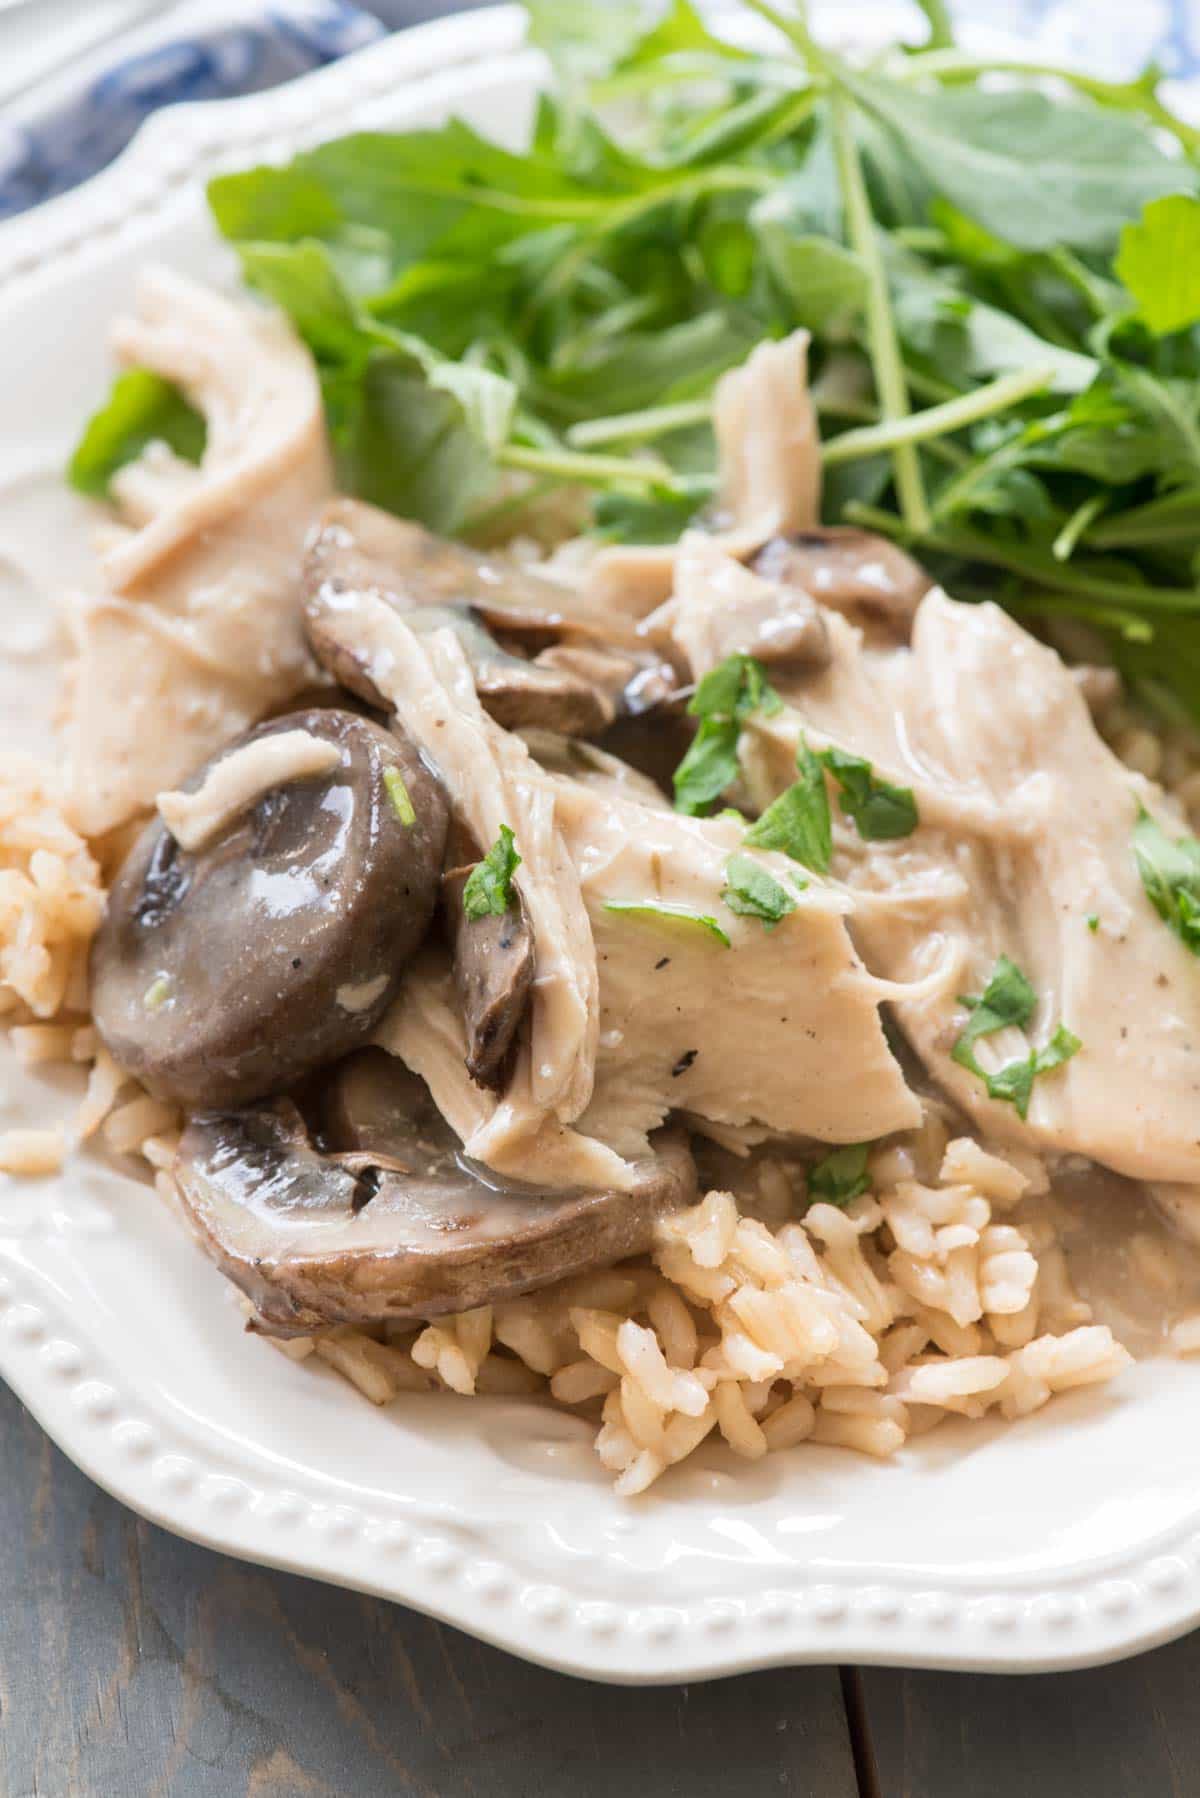 Crockpot Mushroom Chicken - this easy slow cooker chicken recipe is a quick and delicious way to get dinner on the table. Just dump a few ingredients into the crockpot and forget it until dinner!